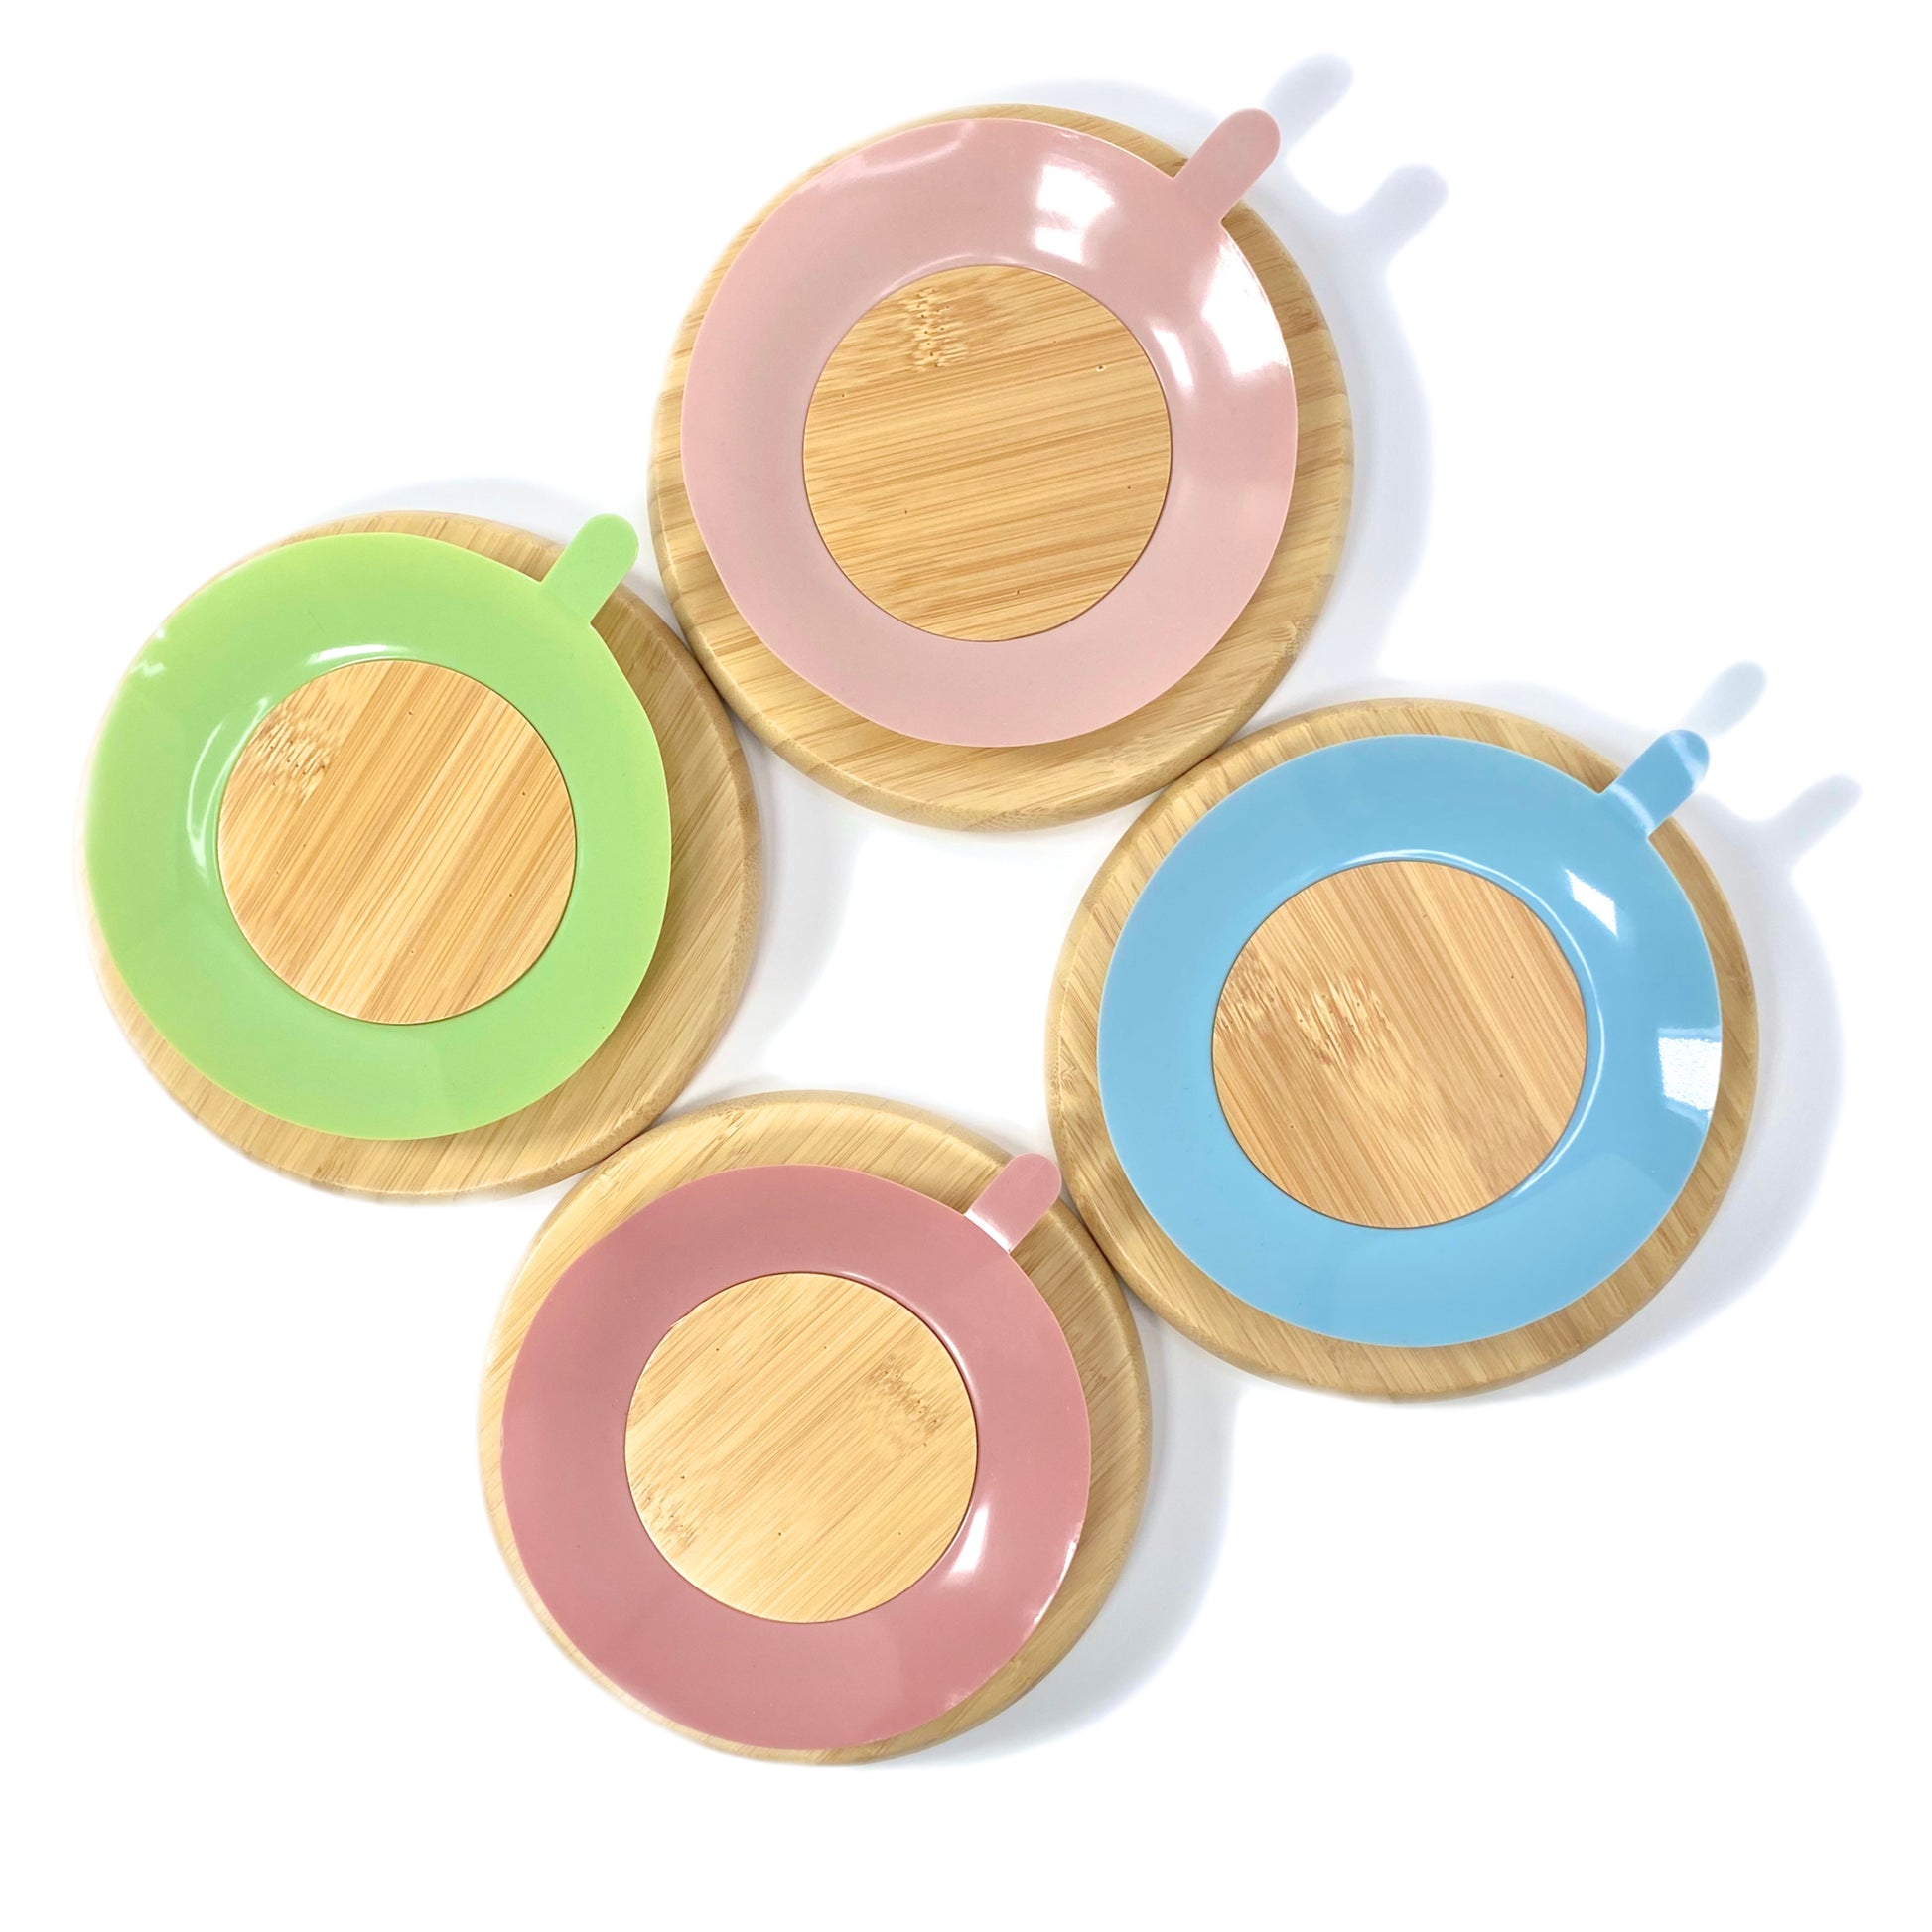 A set of children’s bamboo section plates with colourful silicone suction rings on the base. Back view, featuring the colourful silicone suction rings.